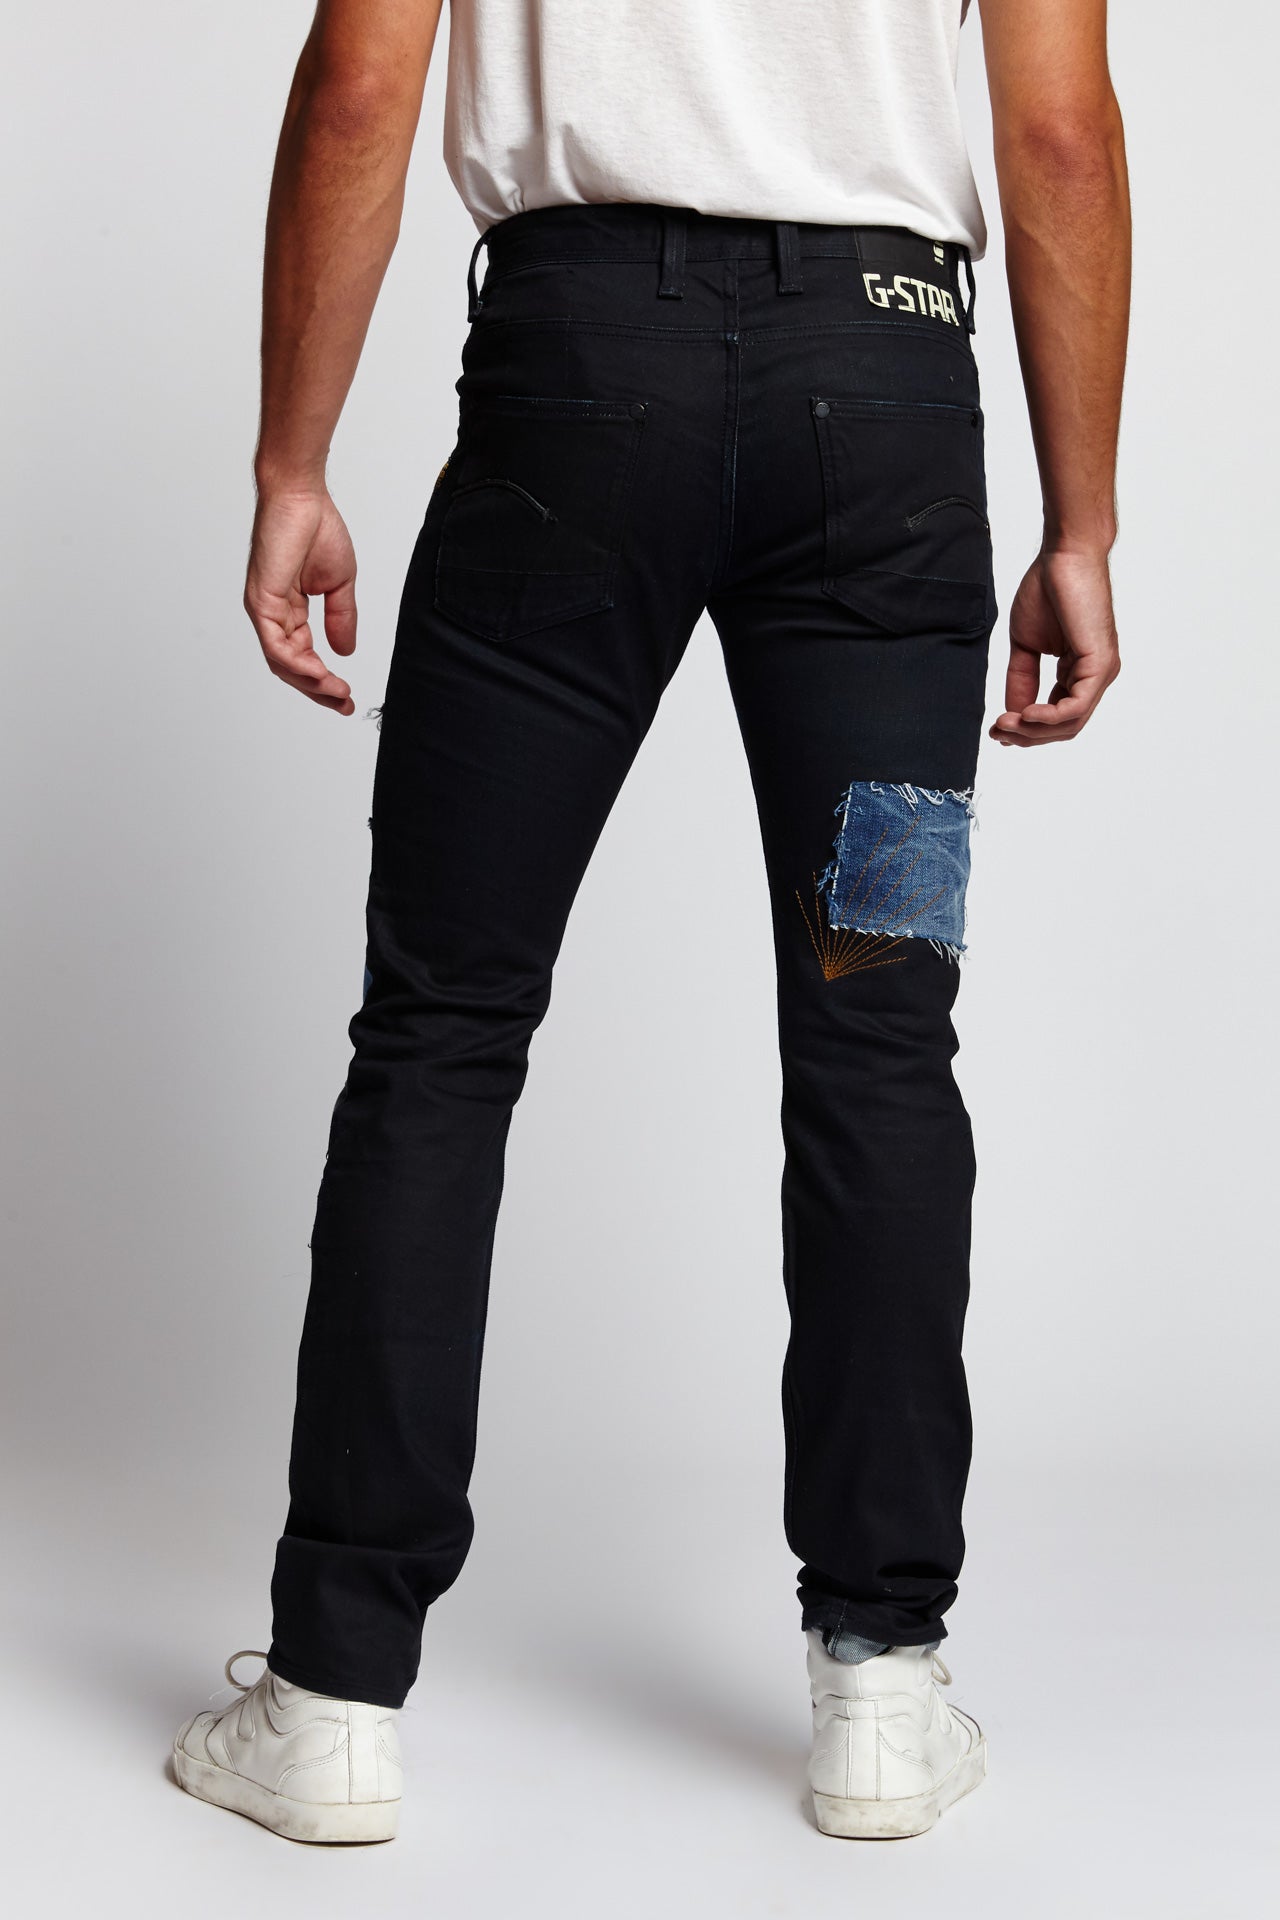 RAW RECONSTRUCTED PATCHWORK COTTON JEANS IN BLACK (32 W) - MUNDANE CLOTHING